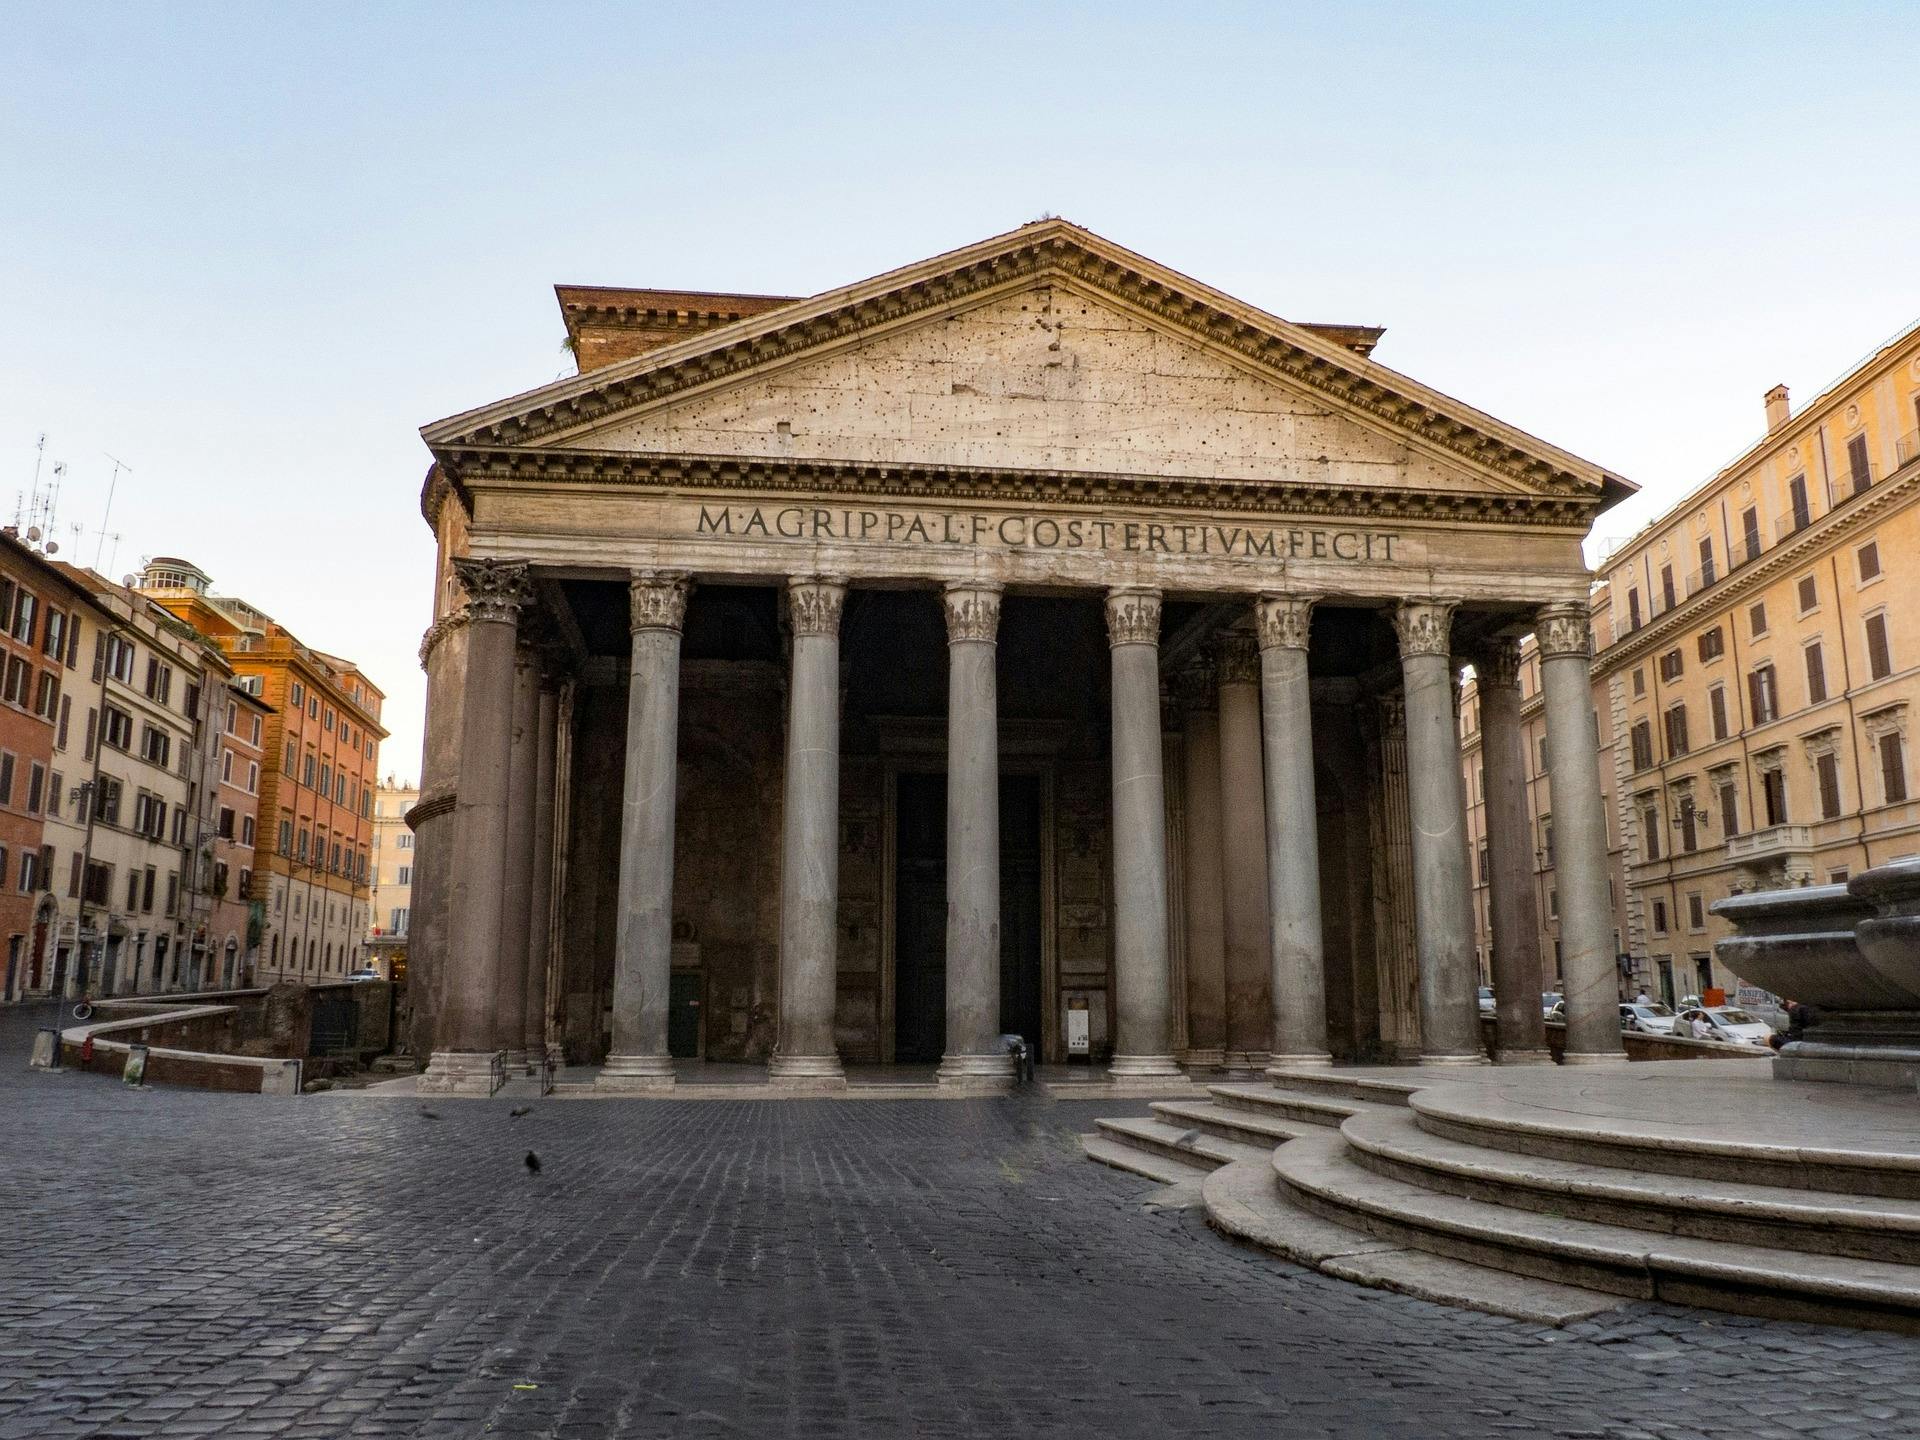 Self guided mystery exploration game in the Pantheon of Rome Musement